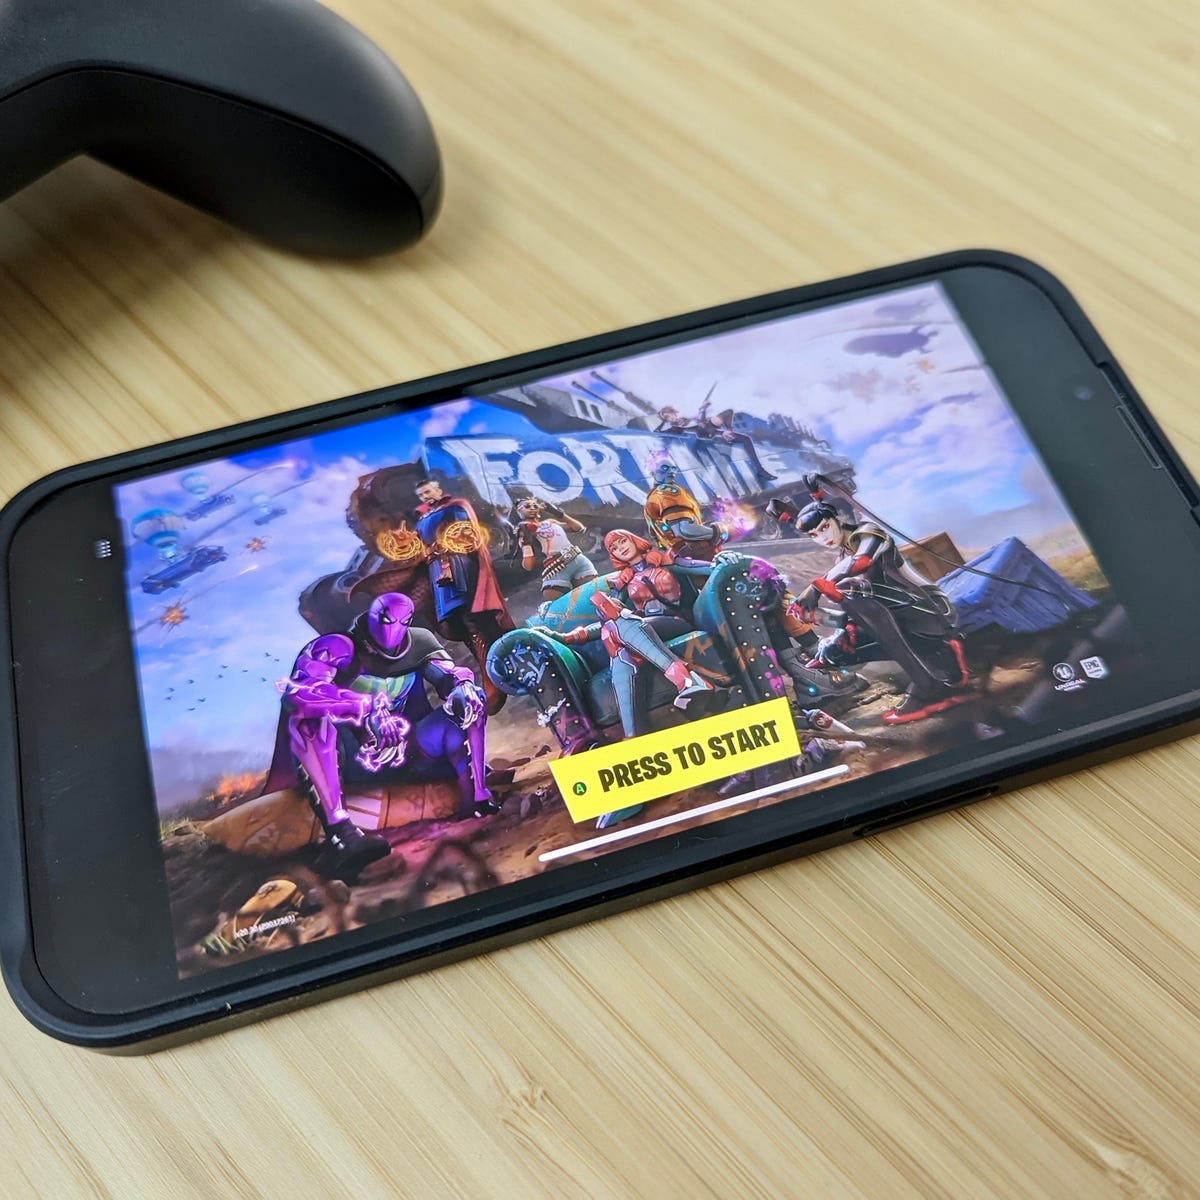 How do I get Fortnite on my Samsung Galaxy device?